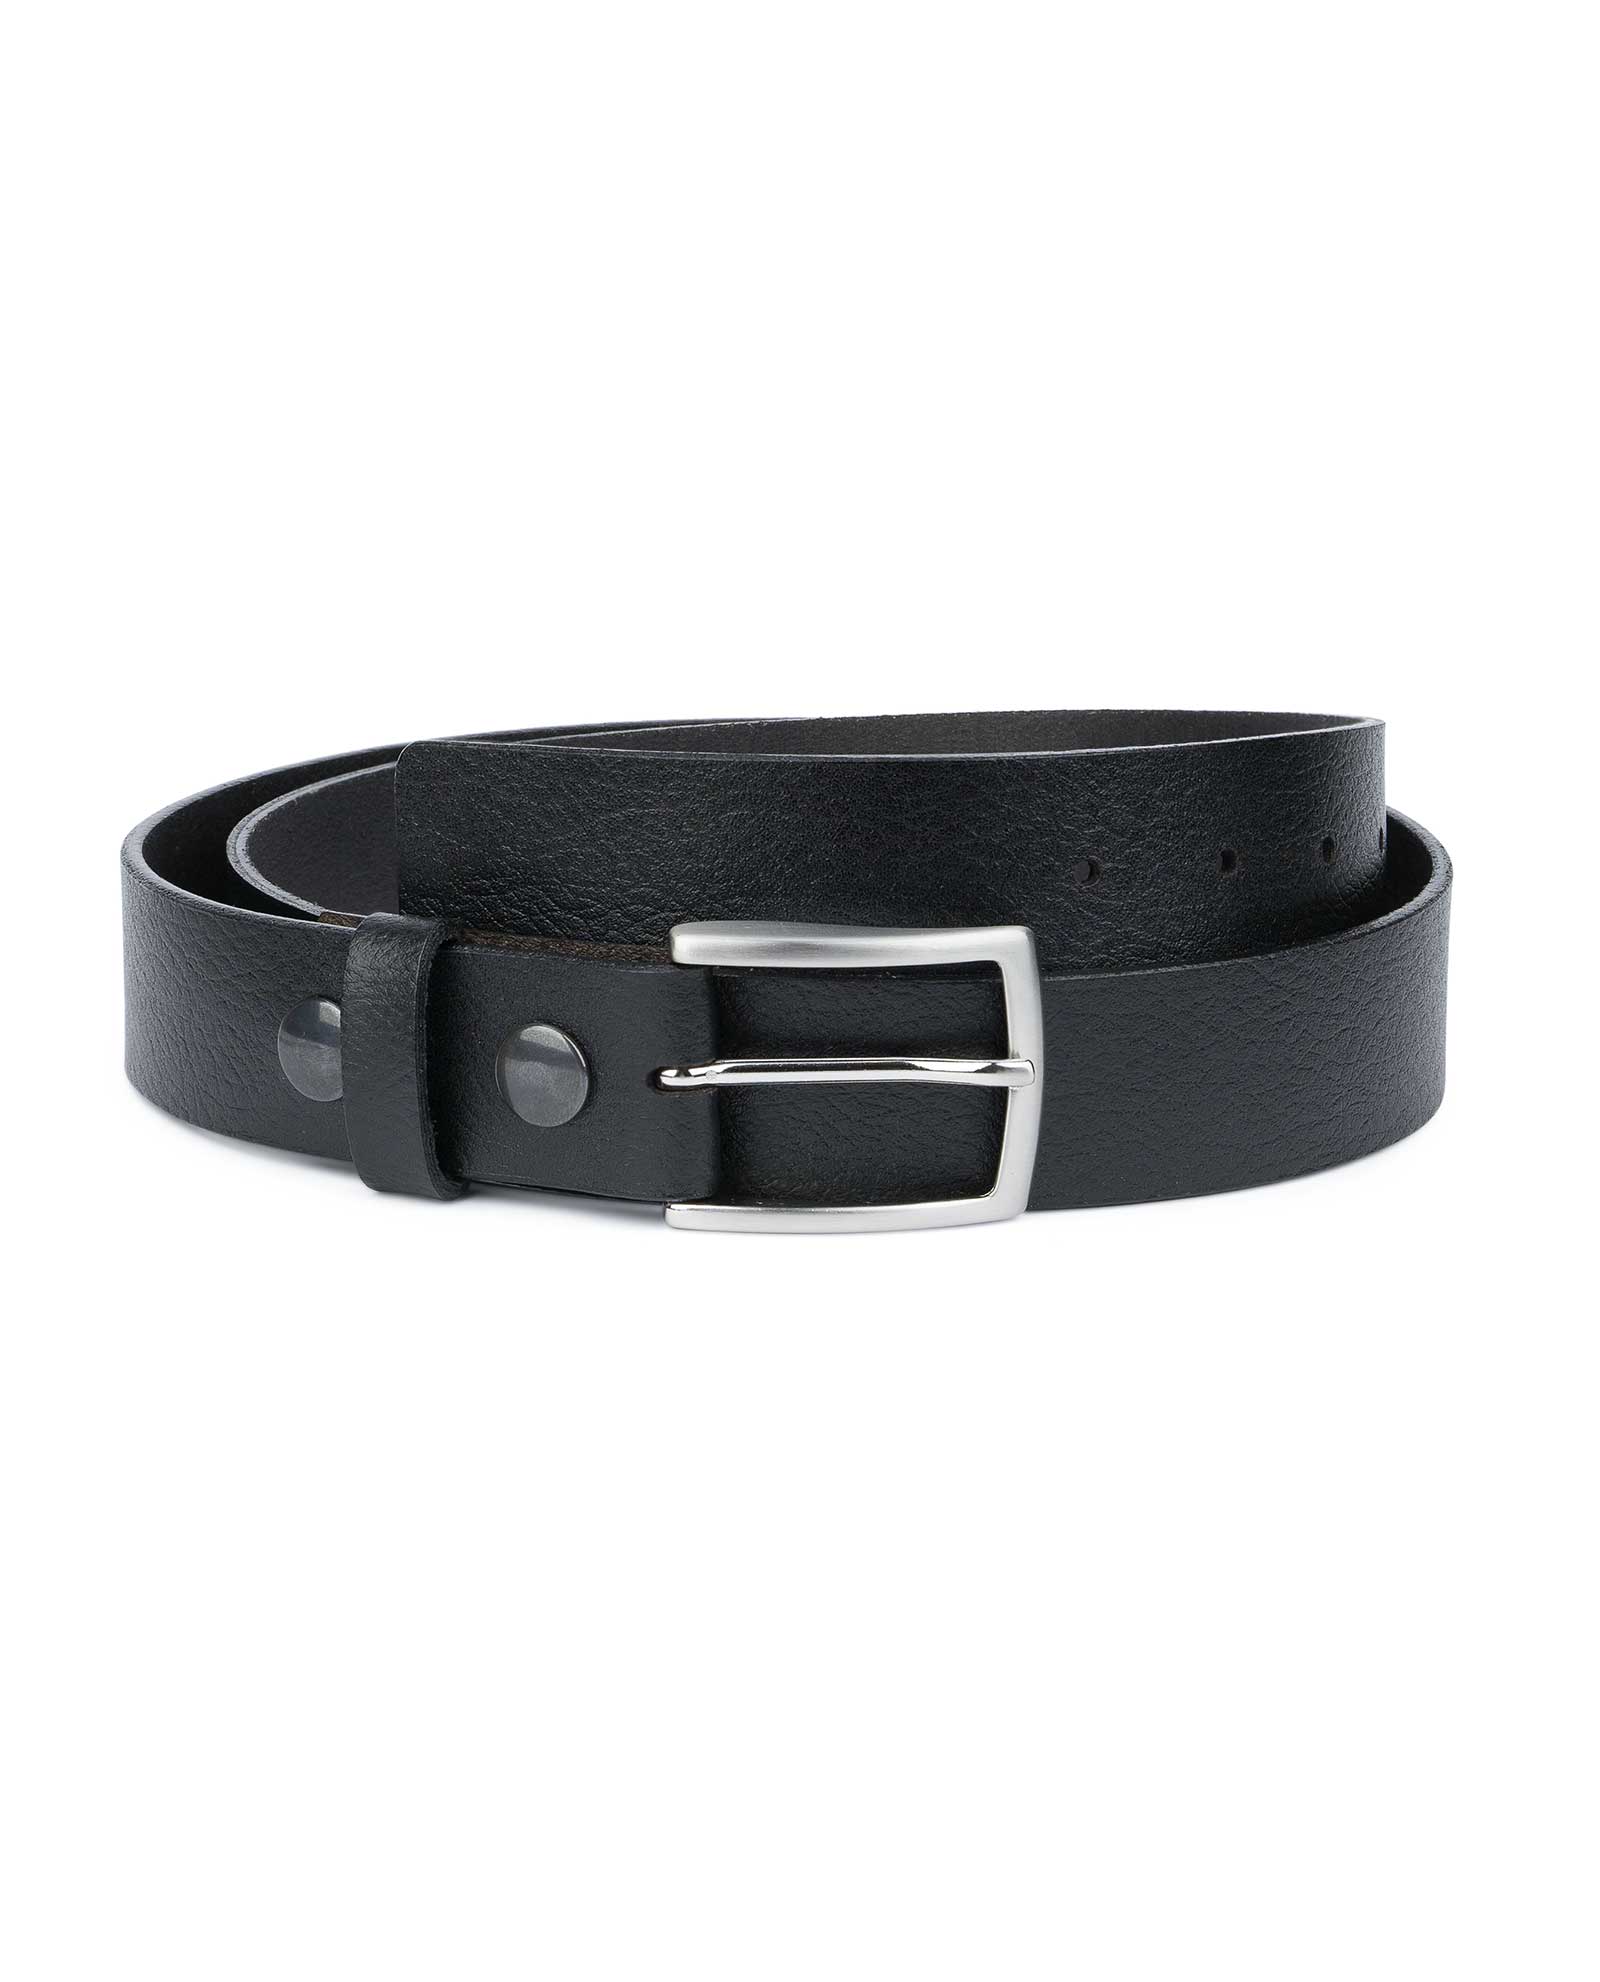 Italian-Made Reversible Leather Belt with Quick-Release Buckle- Black | Men's Business Belts